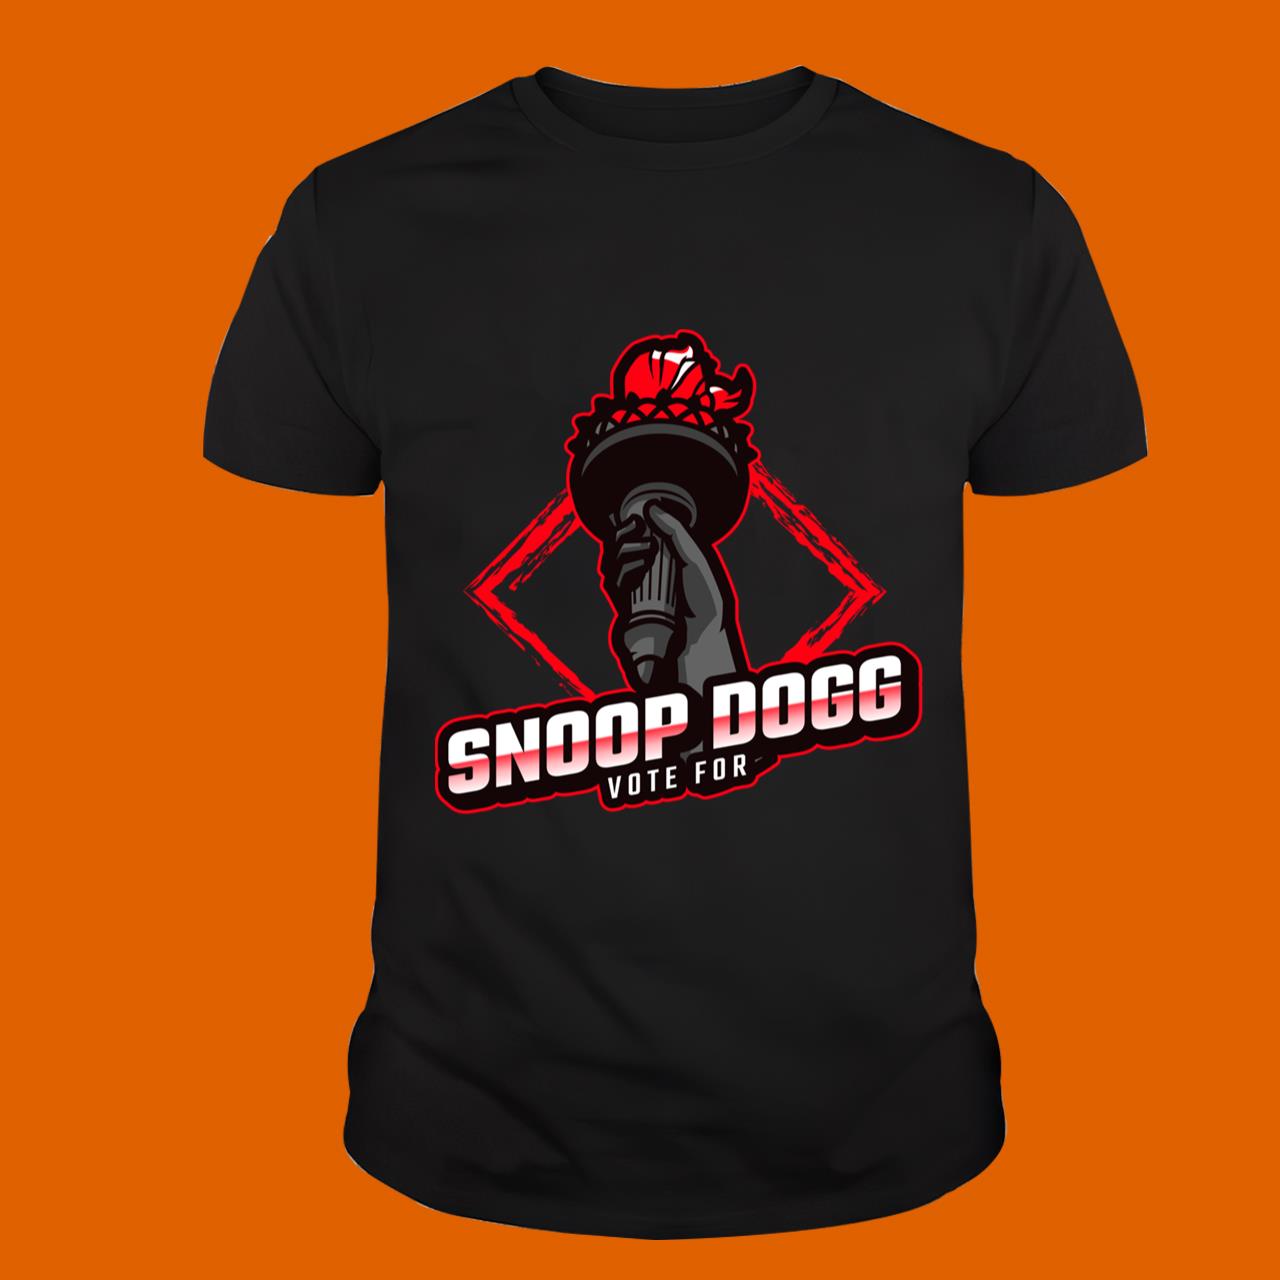 Vote For Snoop Dogg USA Presidential Election Fiery Red Elevated Nation Flame Classic T-Shirt